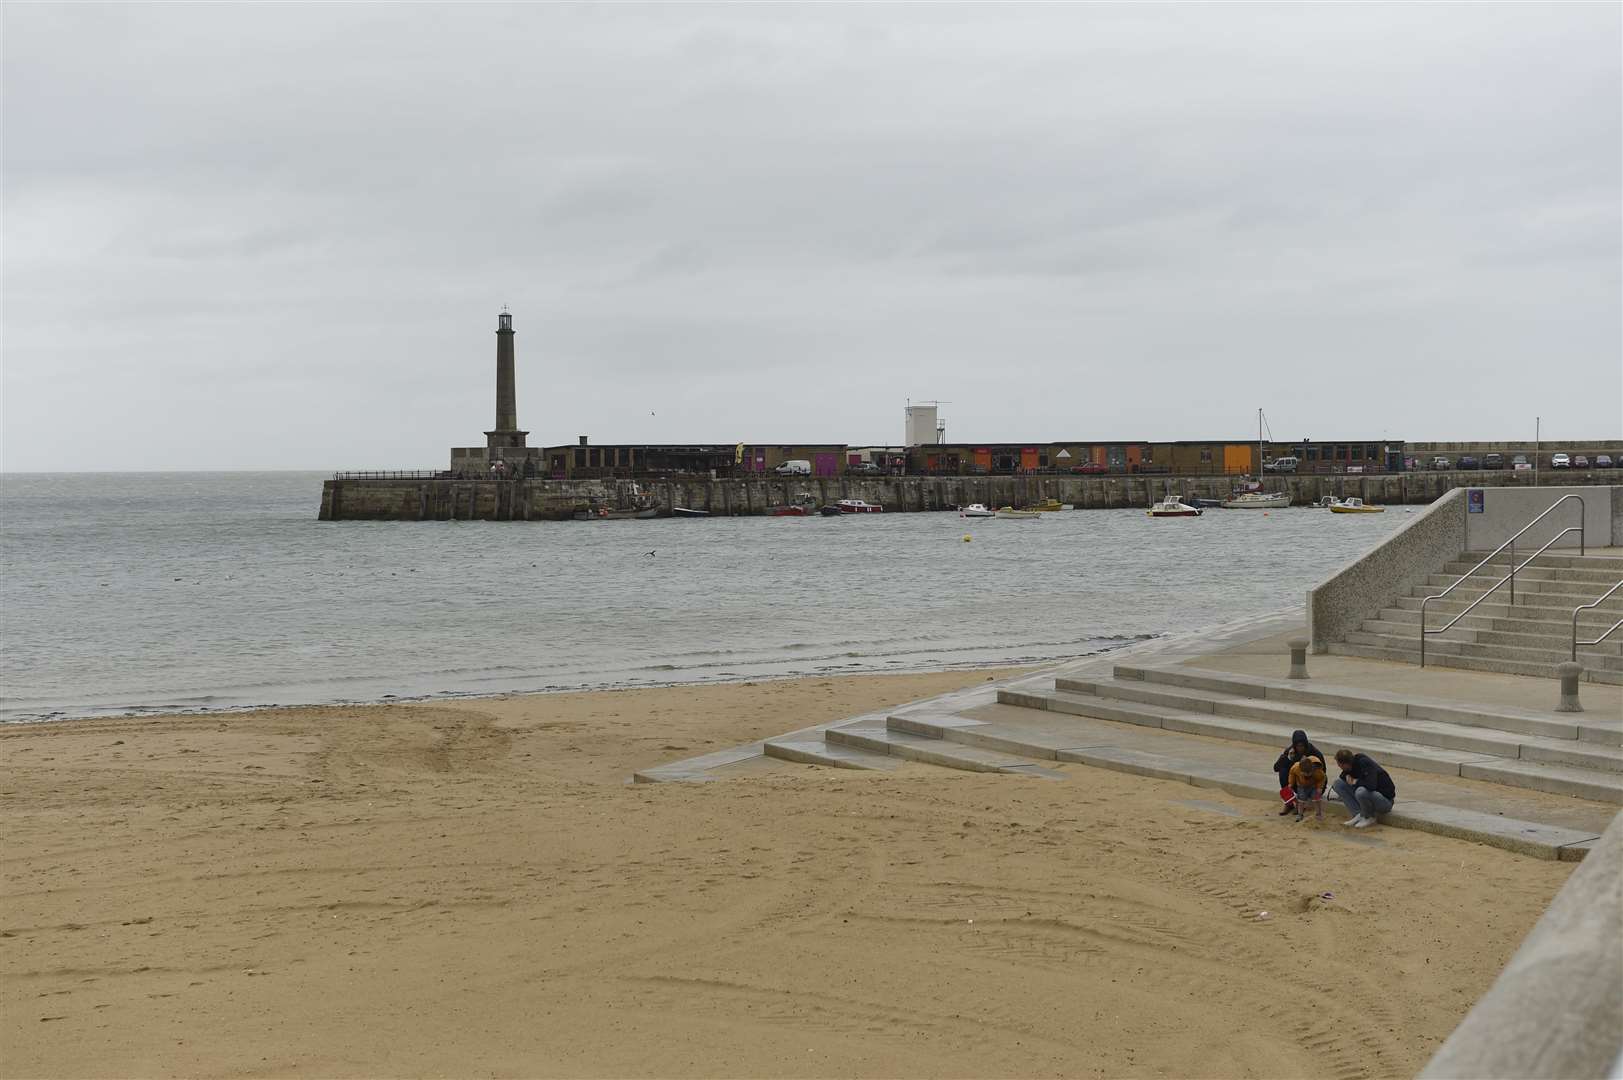 The tragedy happened at Margate harbour